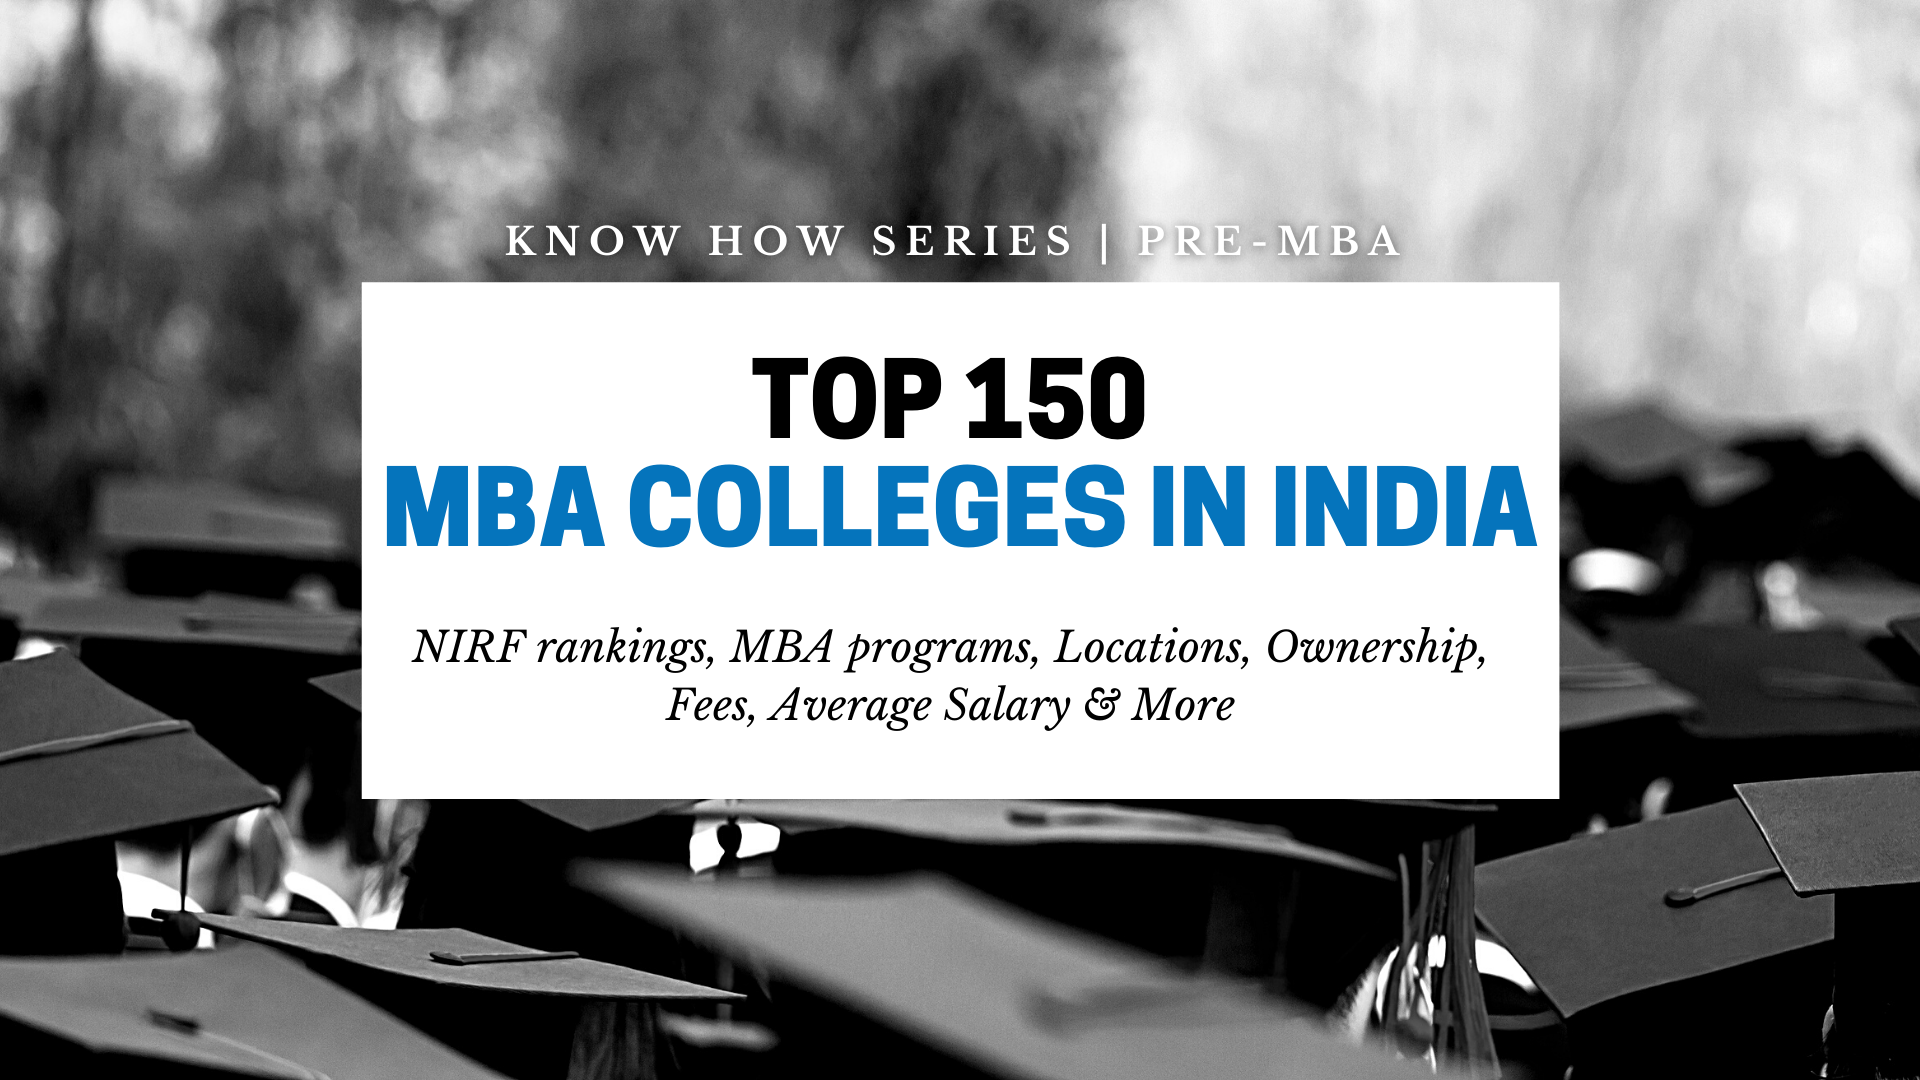 MBA@DoMS, IIT Kanpur on X: The MBA IIT Kanpur community today